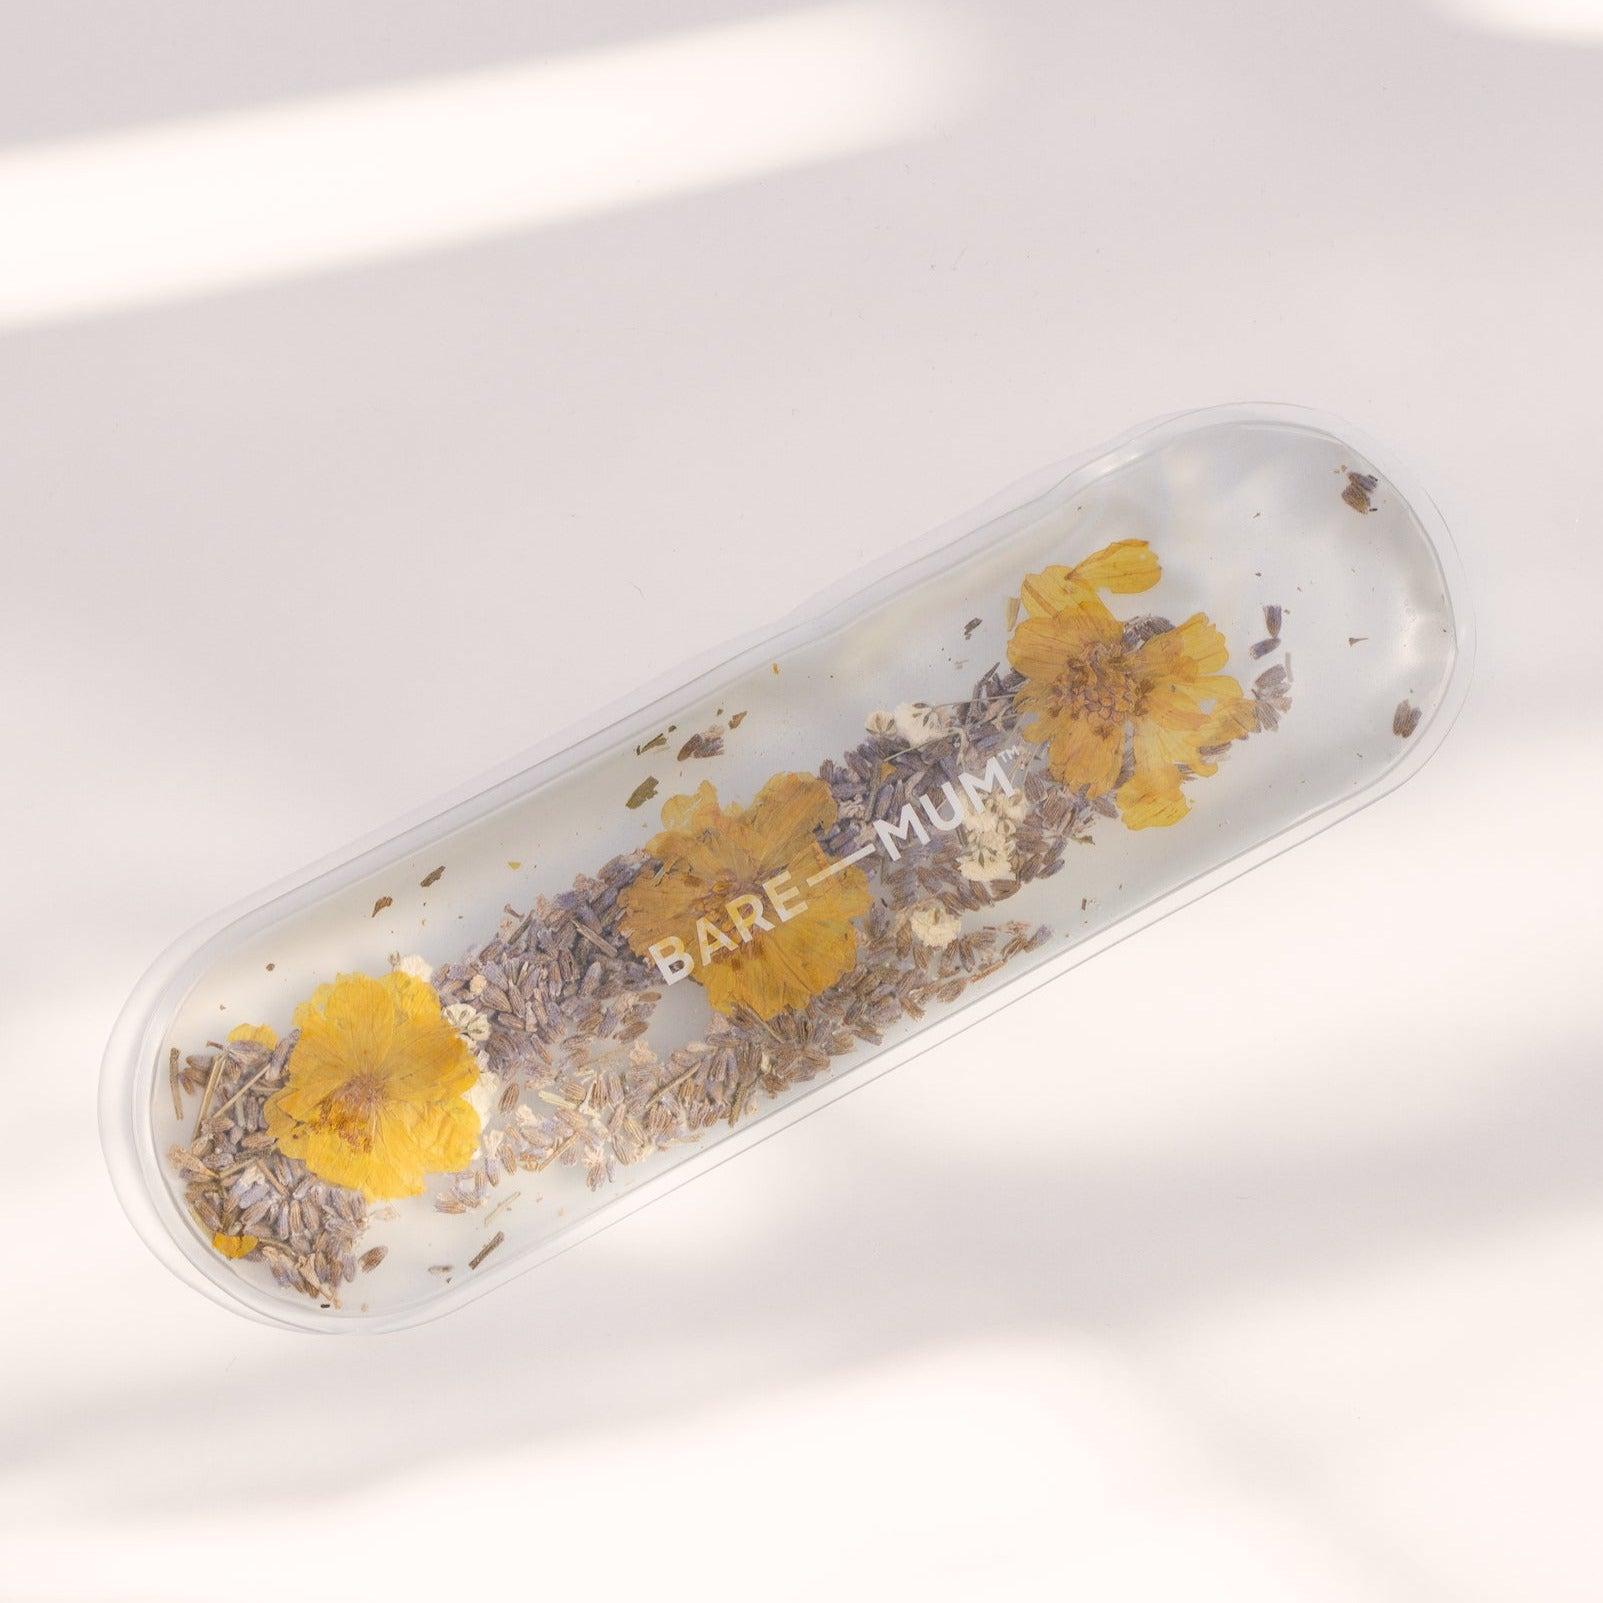  the Warm & Cool Insert filled with soothing dried flowers on a white surface, created for postpartum recovery by Bare Mum.